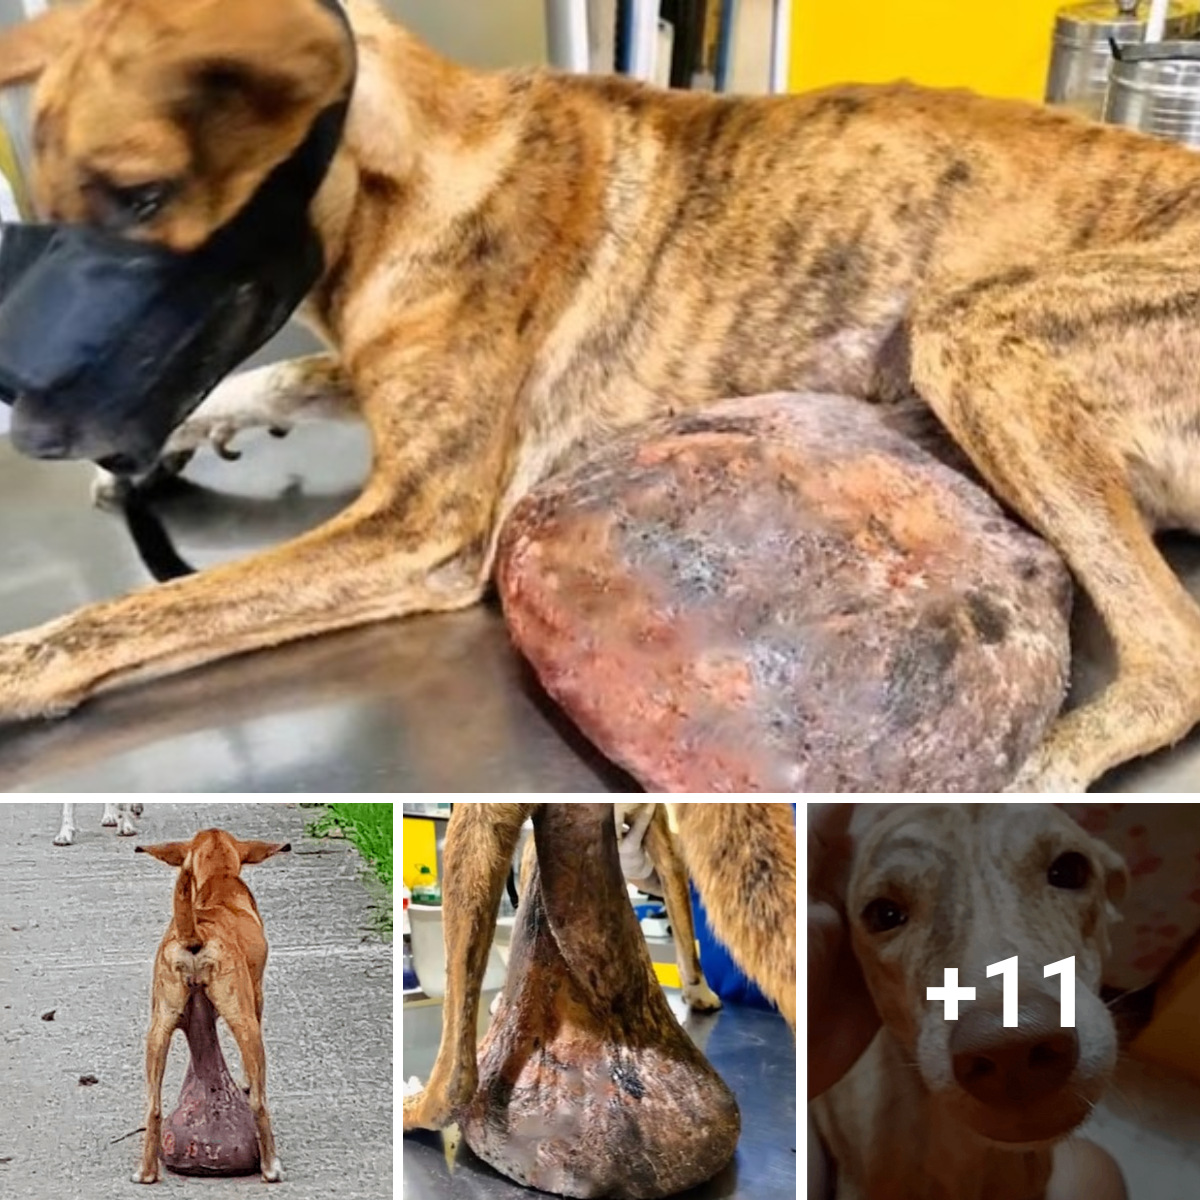 A large tumor is lying on the ground in front of a defenseless and fragile stray dog, and it has been a while since anyone has helped. His yearning for help is overwhelming.